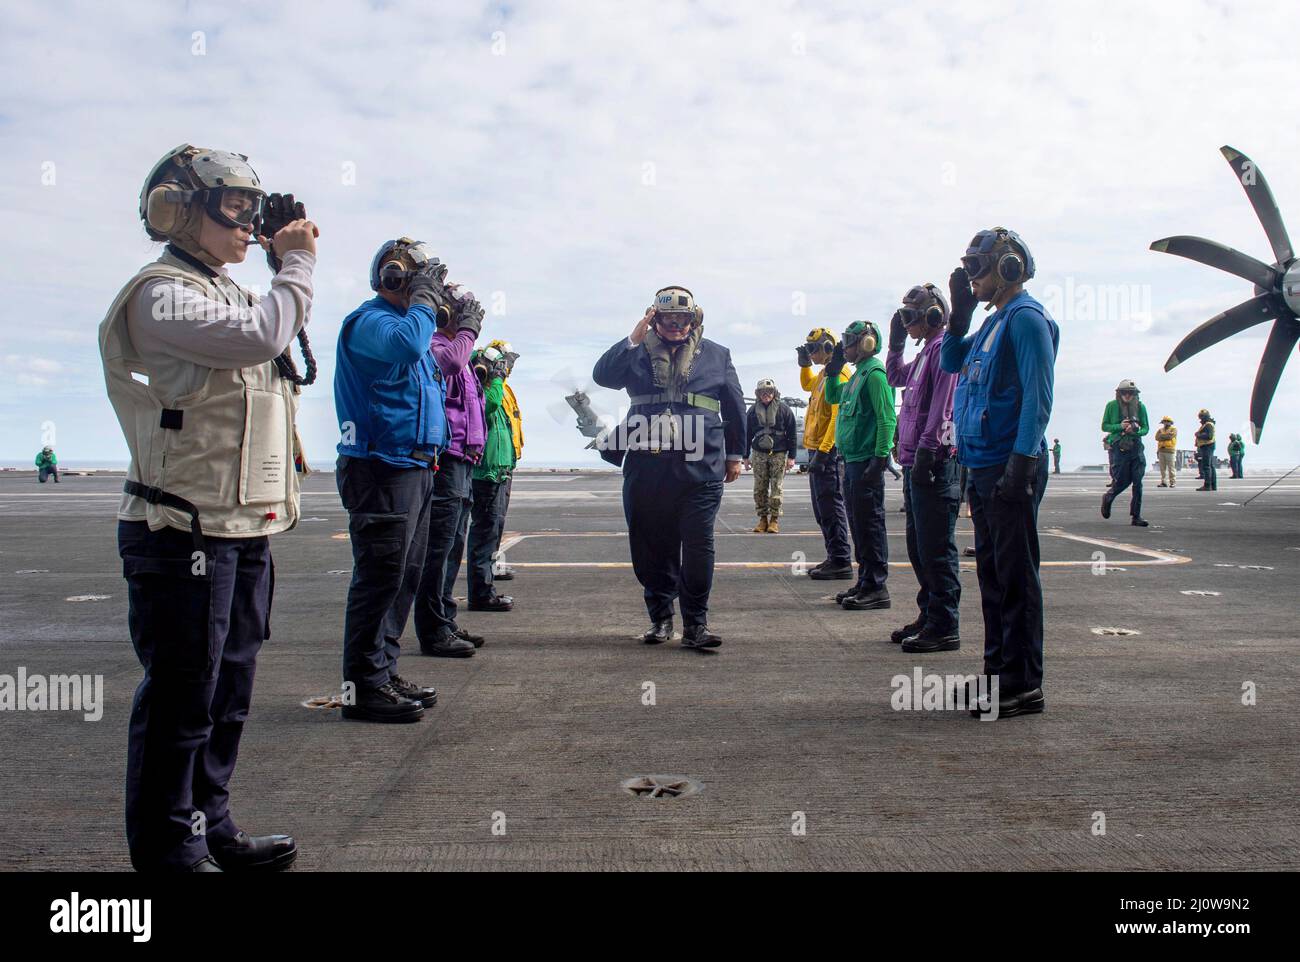 Ionian Sea, Greece. 17 March, 2022. U.S. Secretary of the Navy Carlos Del Toro salutes as he makes way past the sideboys after arriving aboard the aircraft carrier USS Harry S. Truman, March 17, 2022 in the Ionian Sea.  Credit: MC2 Kelsey Trinh/US Navy/Alamy Live News Stock Photo